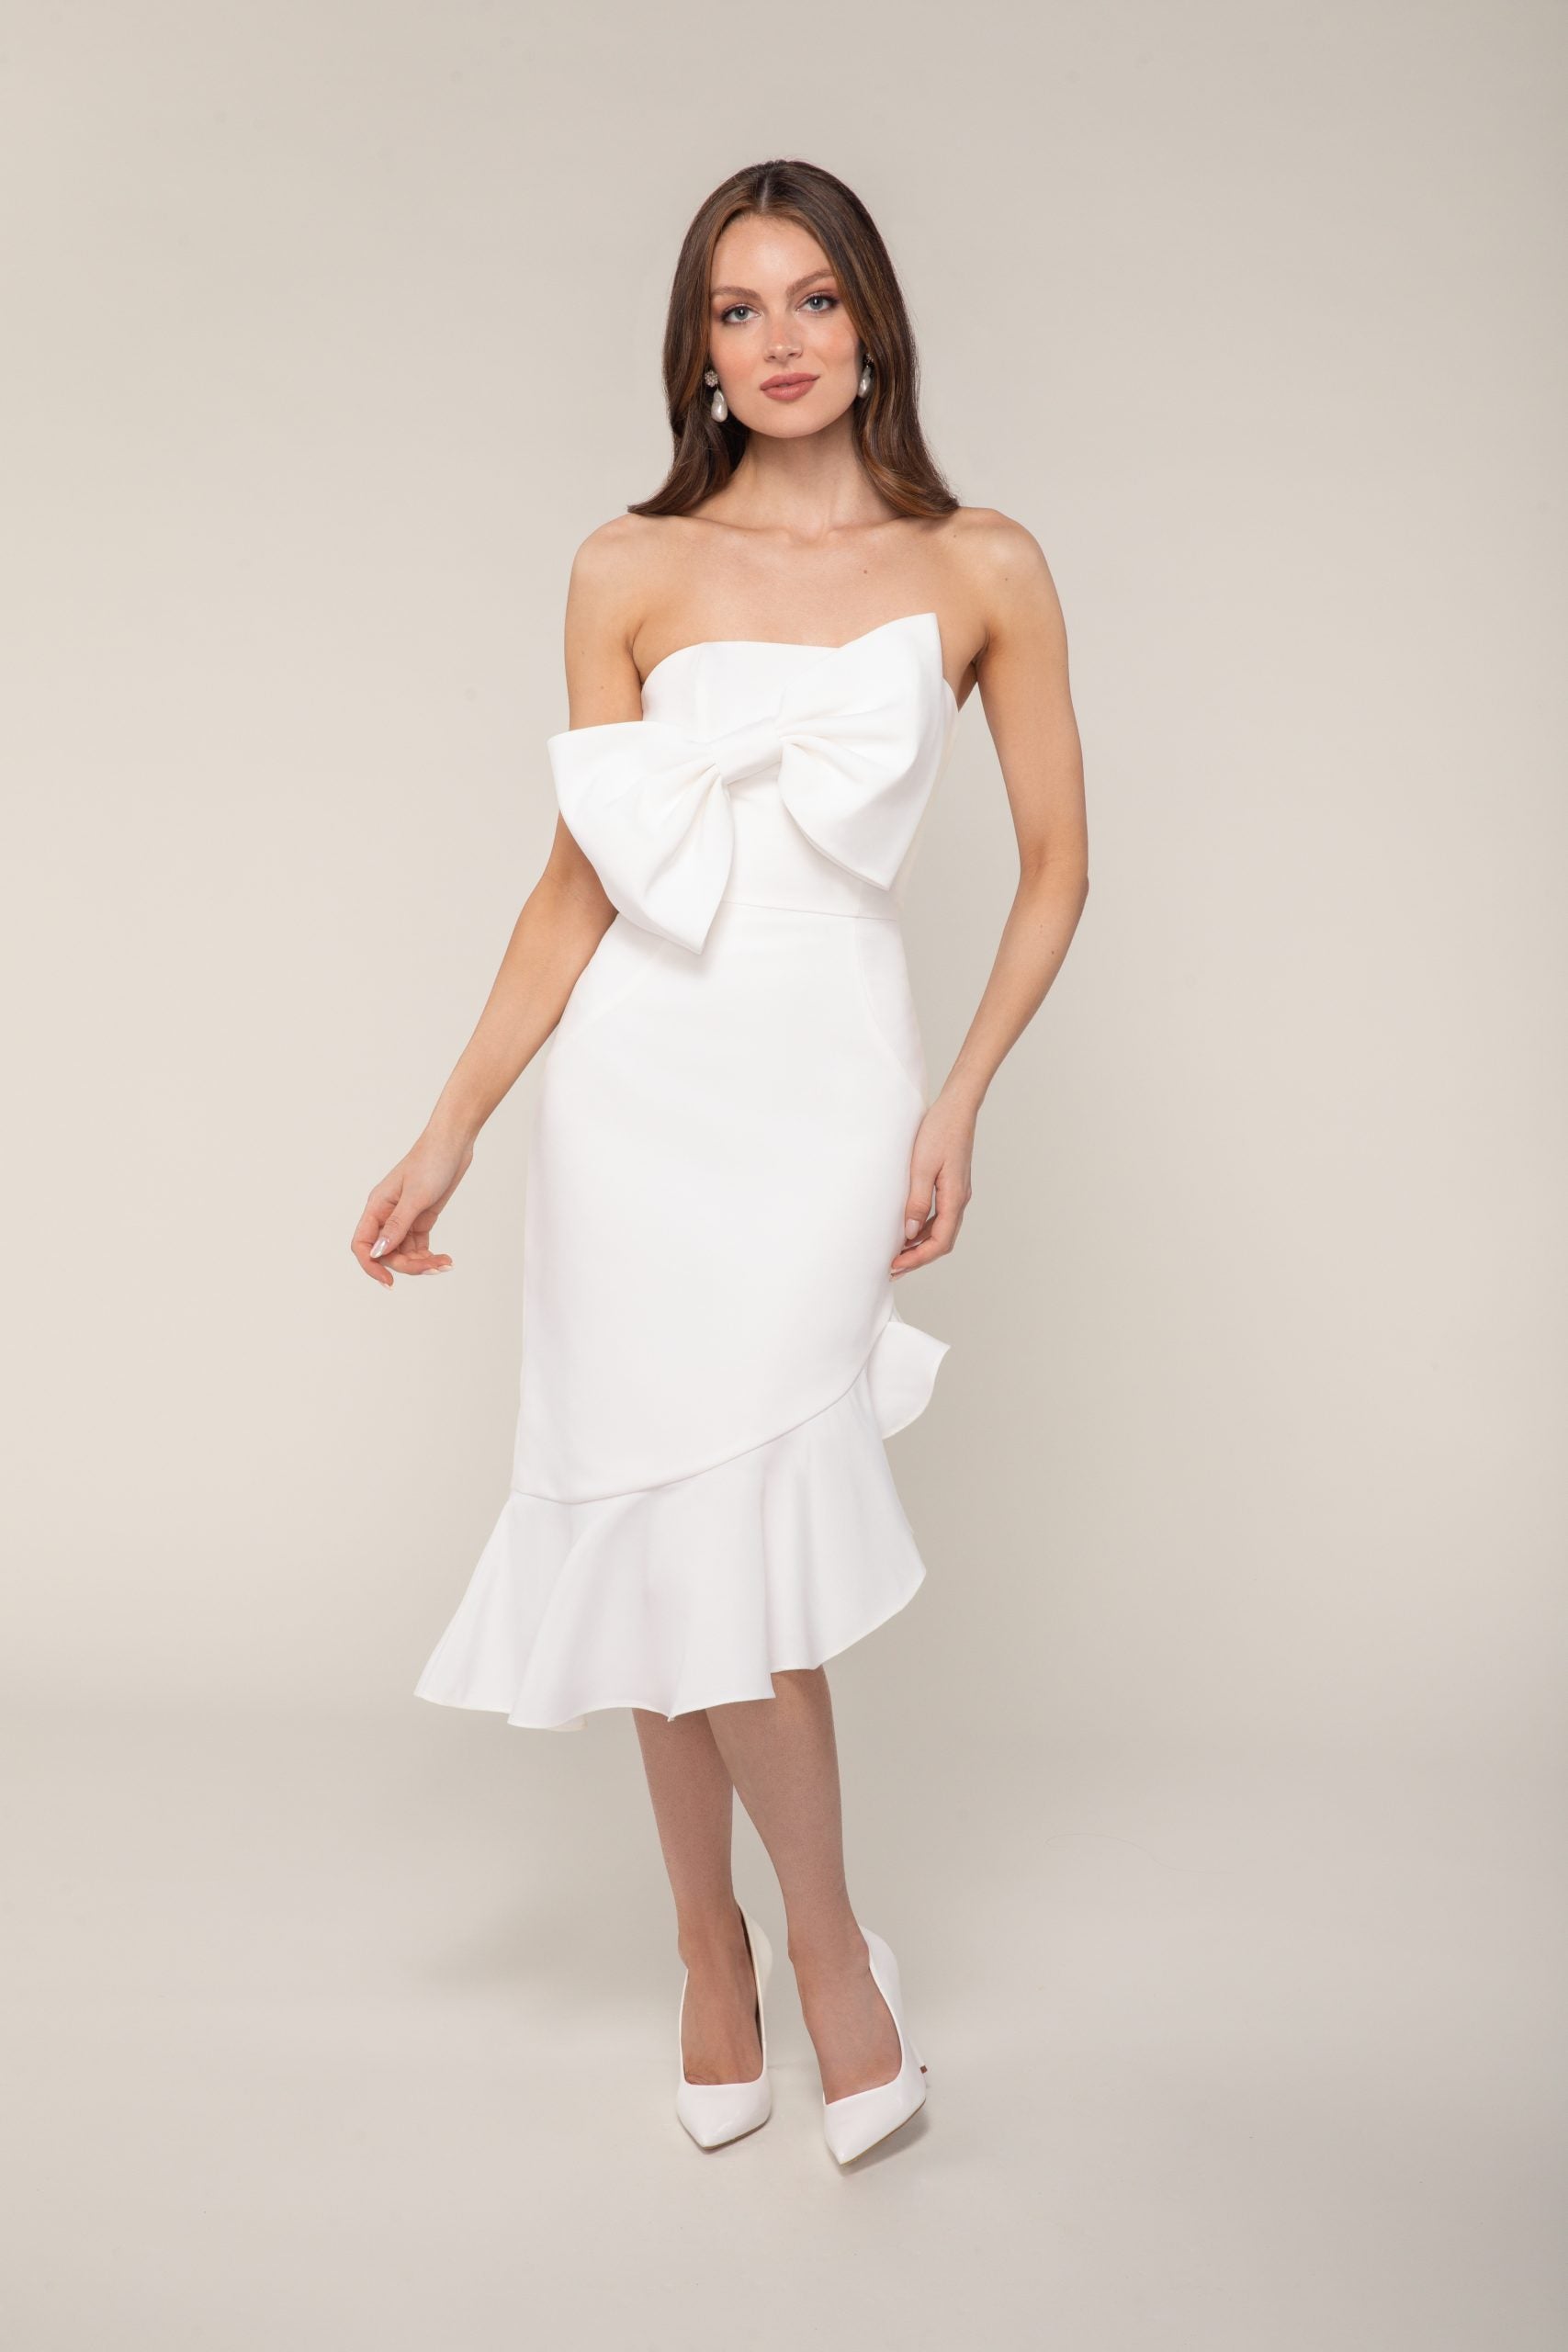 Straight Across Neckline Midi Length Dress Of Faille With An Angular Ruffle At The Hem And Dramatic Bow At Bust by Anne Barge - Image 1